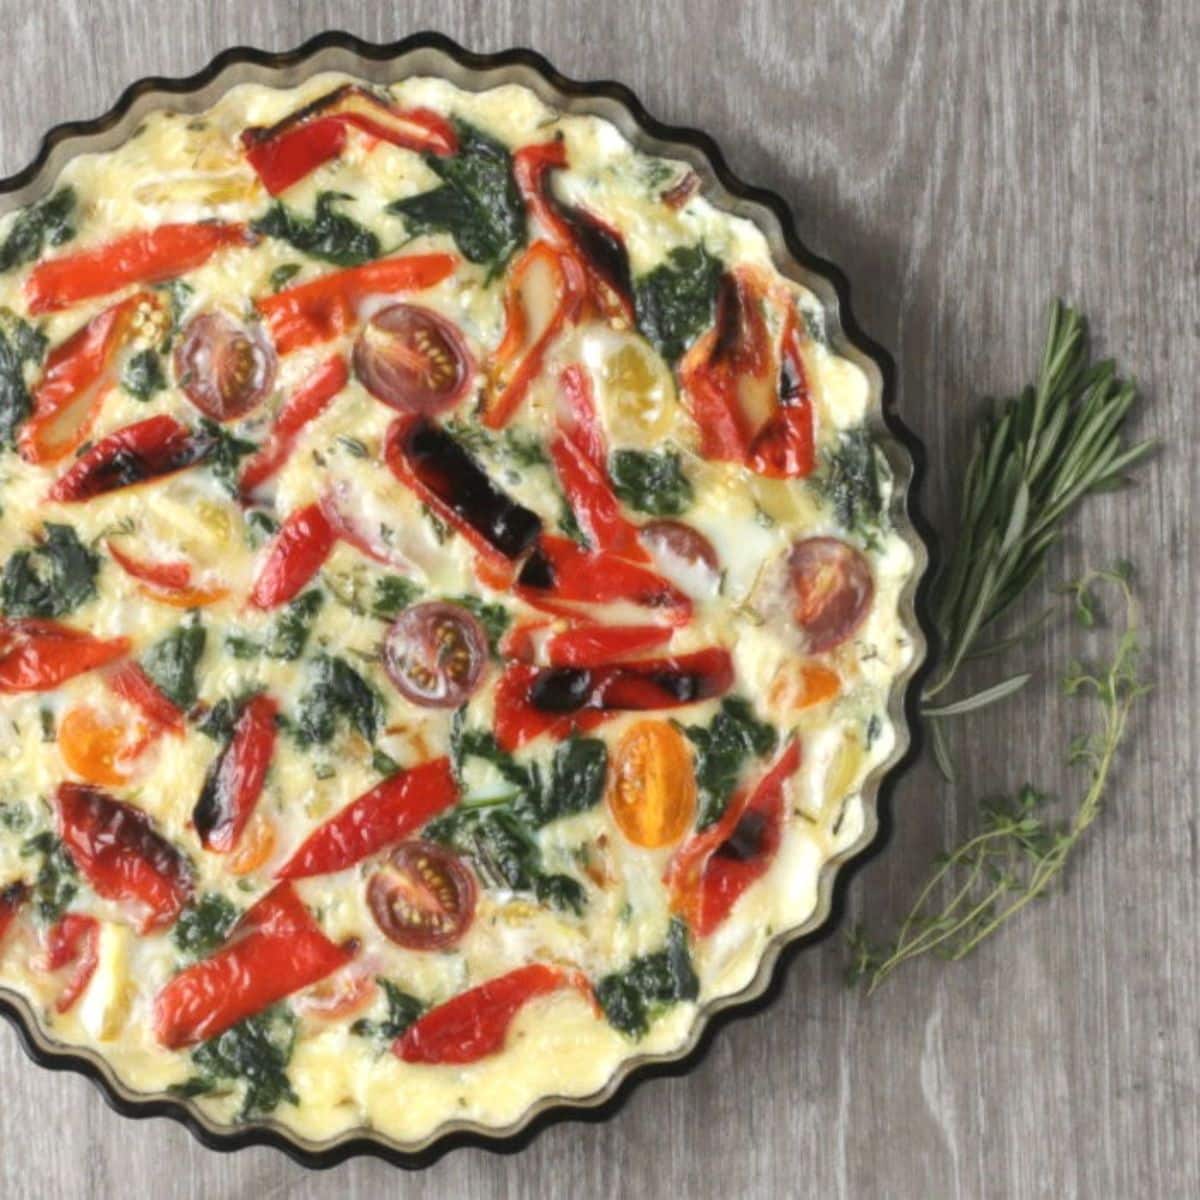 Healthy egg white crustless quiche in a bowl.